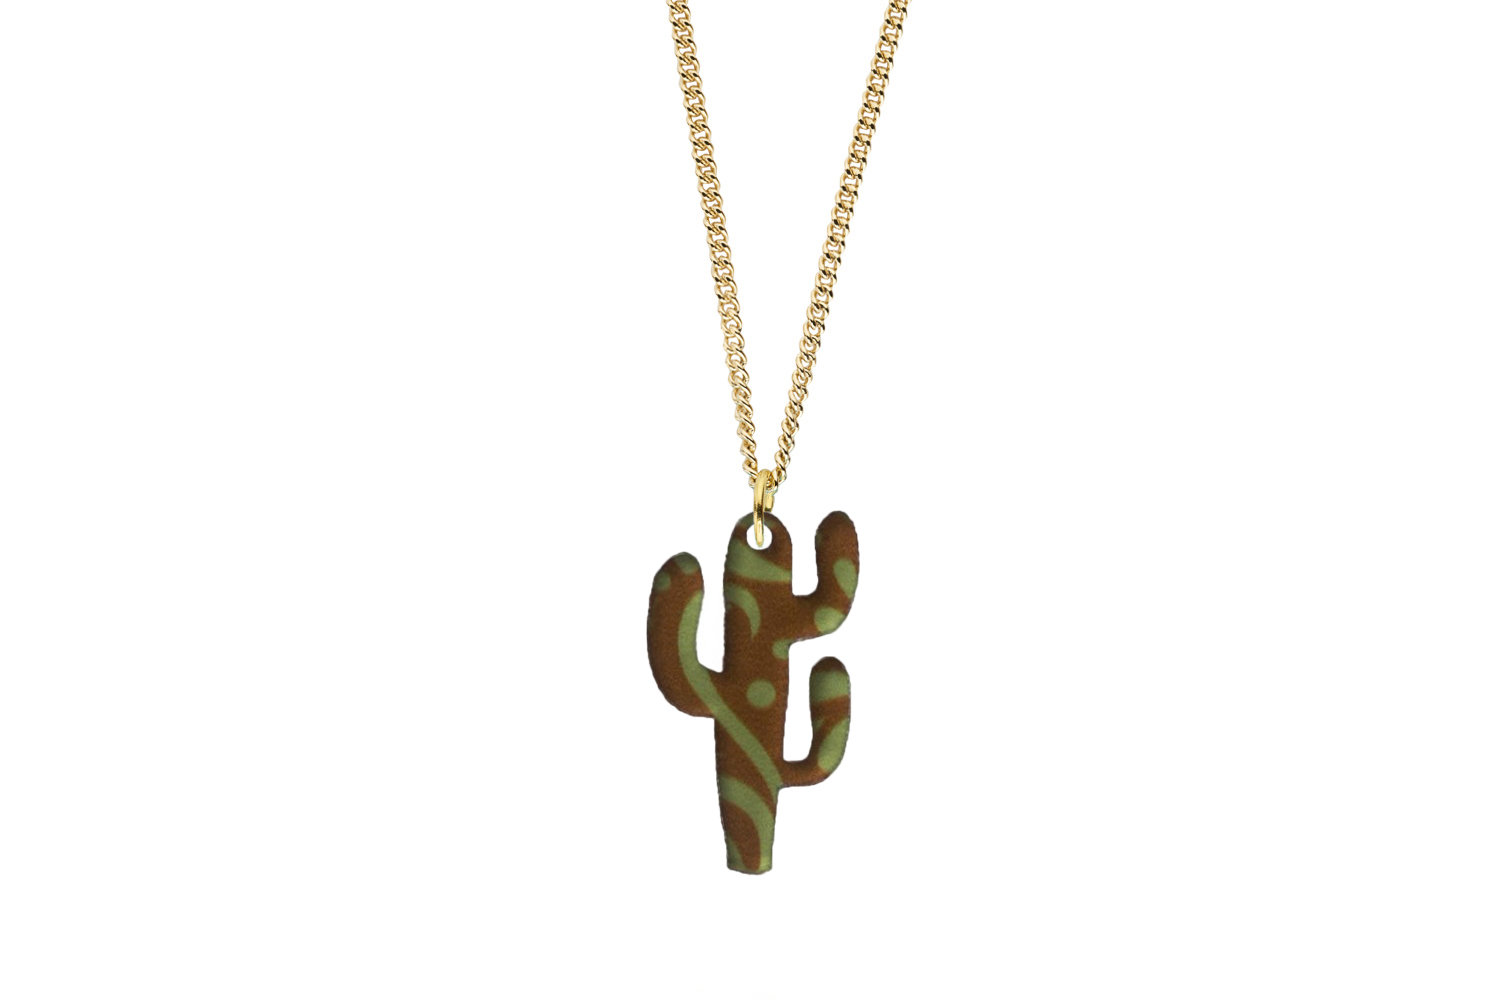 Cactus Pendant Sculpted Style on Chain Necklace